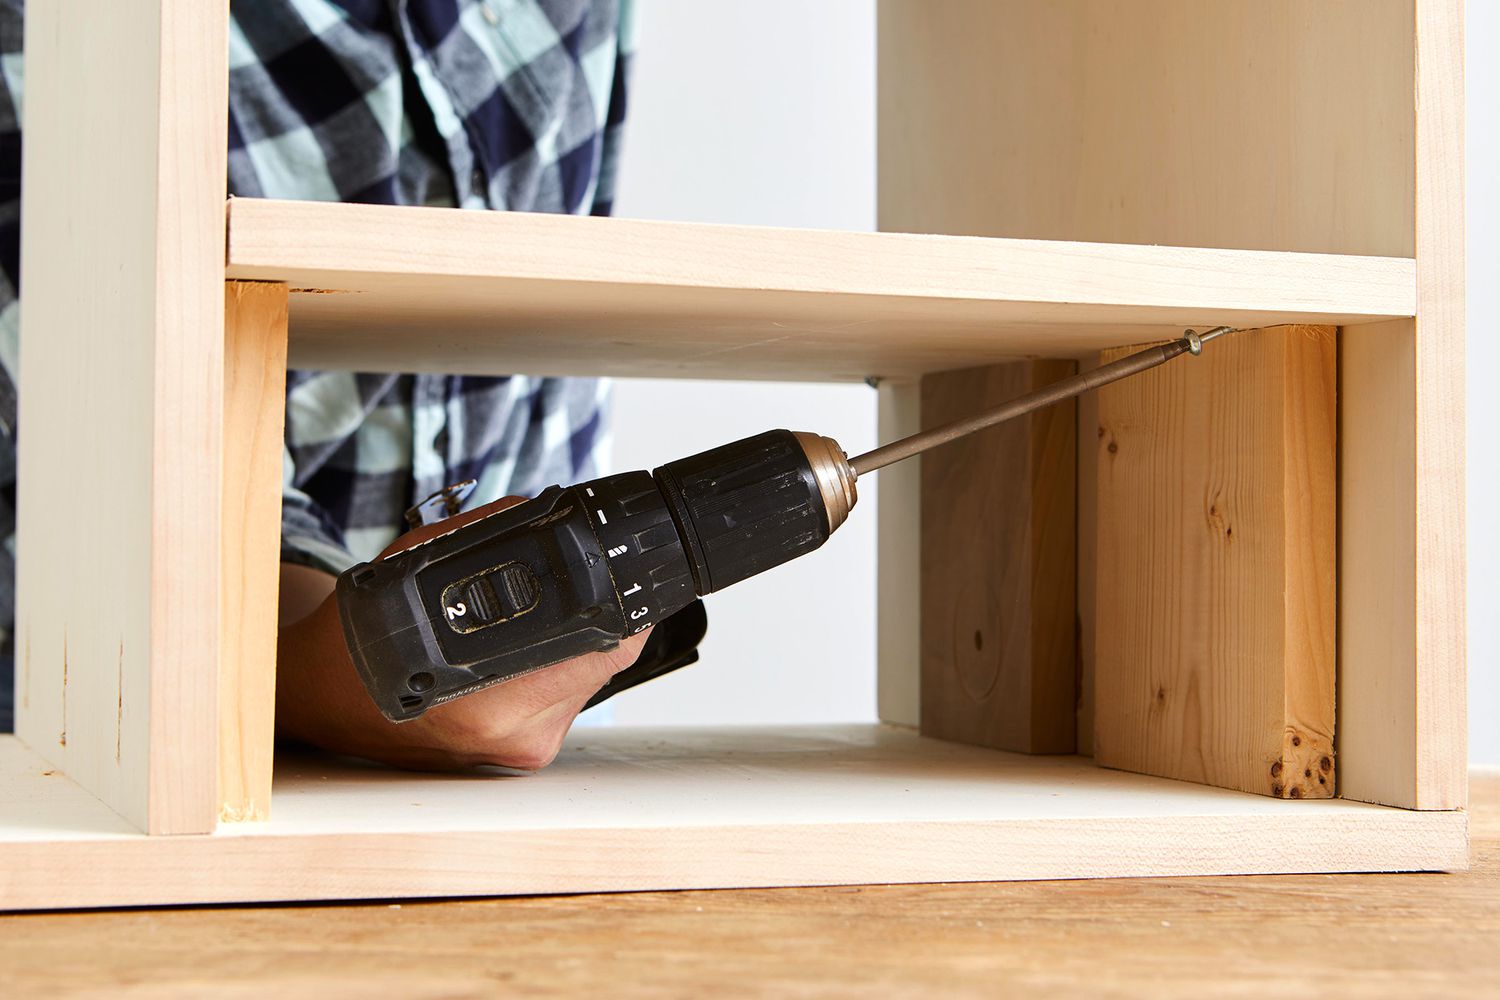 screwing shelf in place through pocket holes with support boards